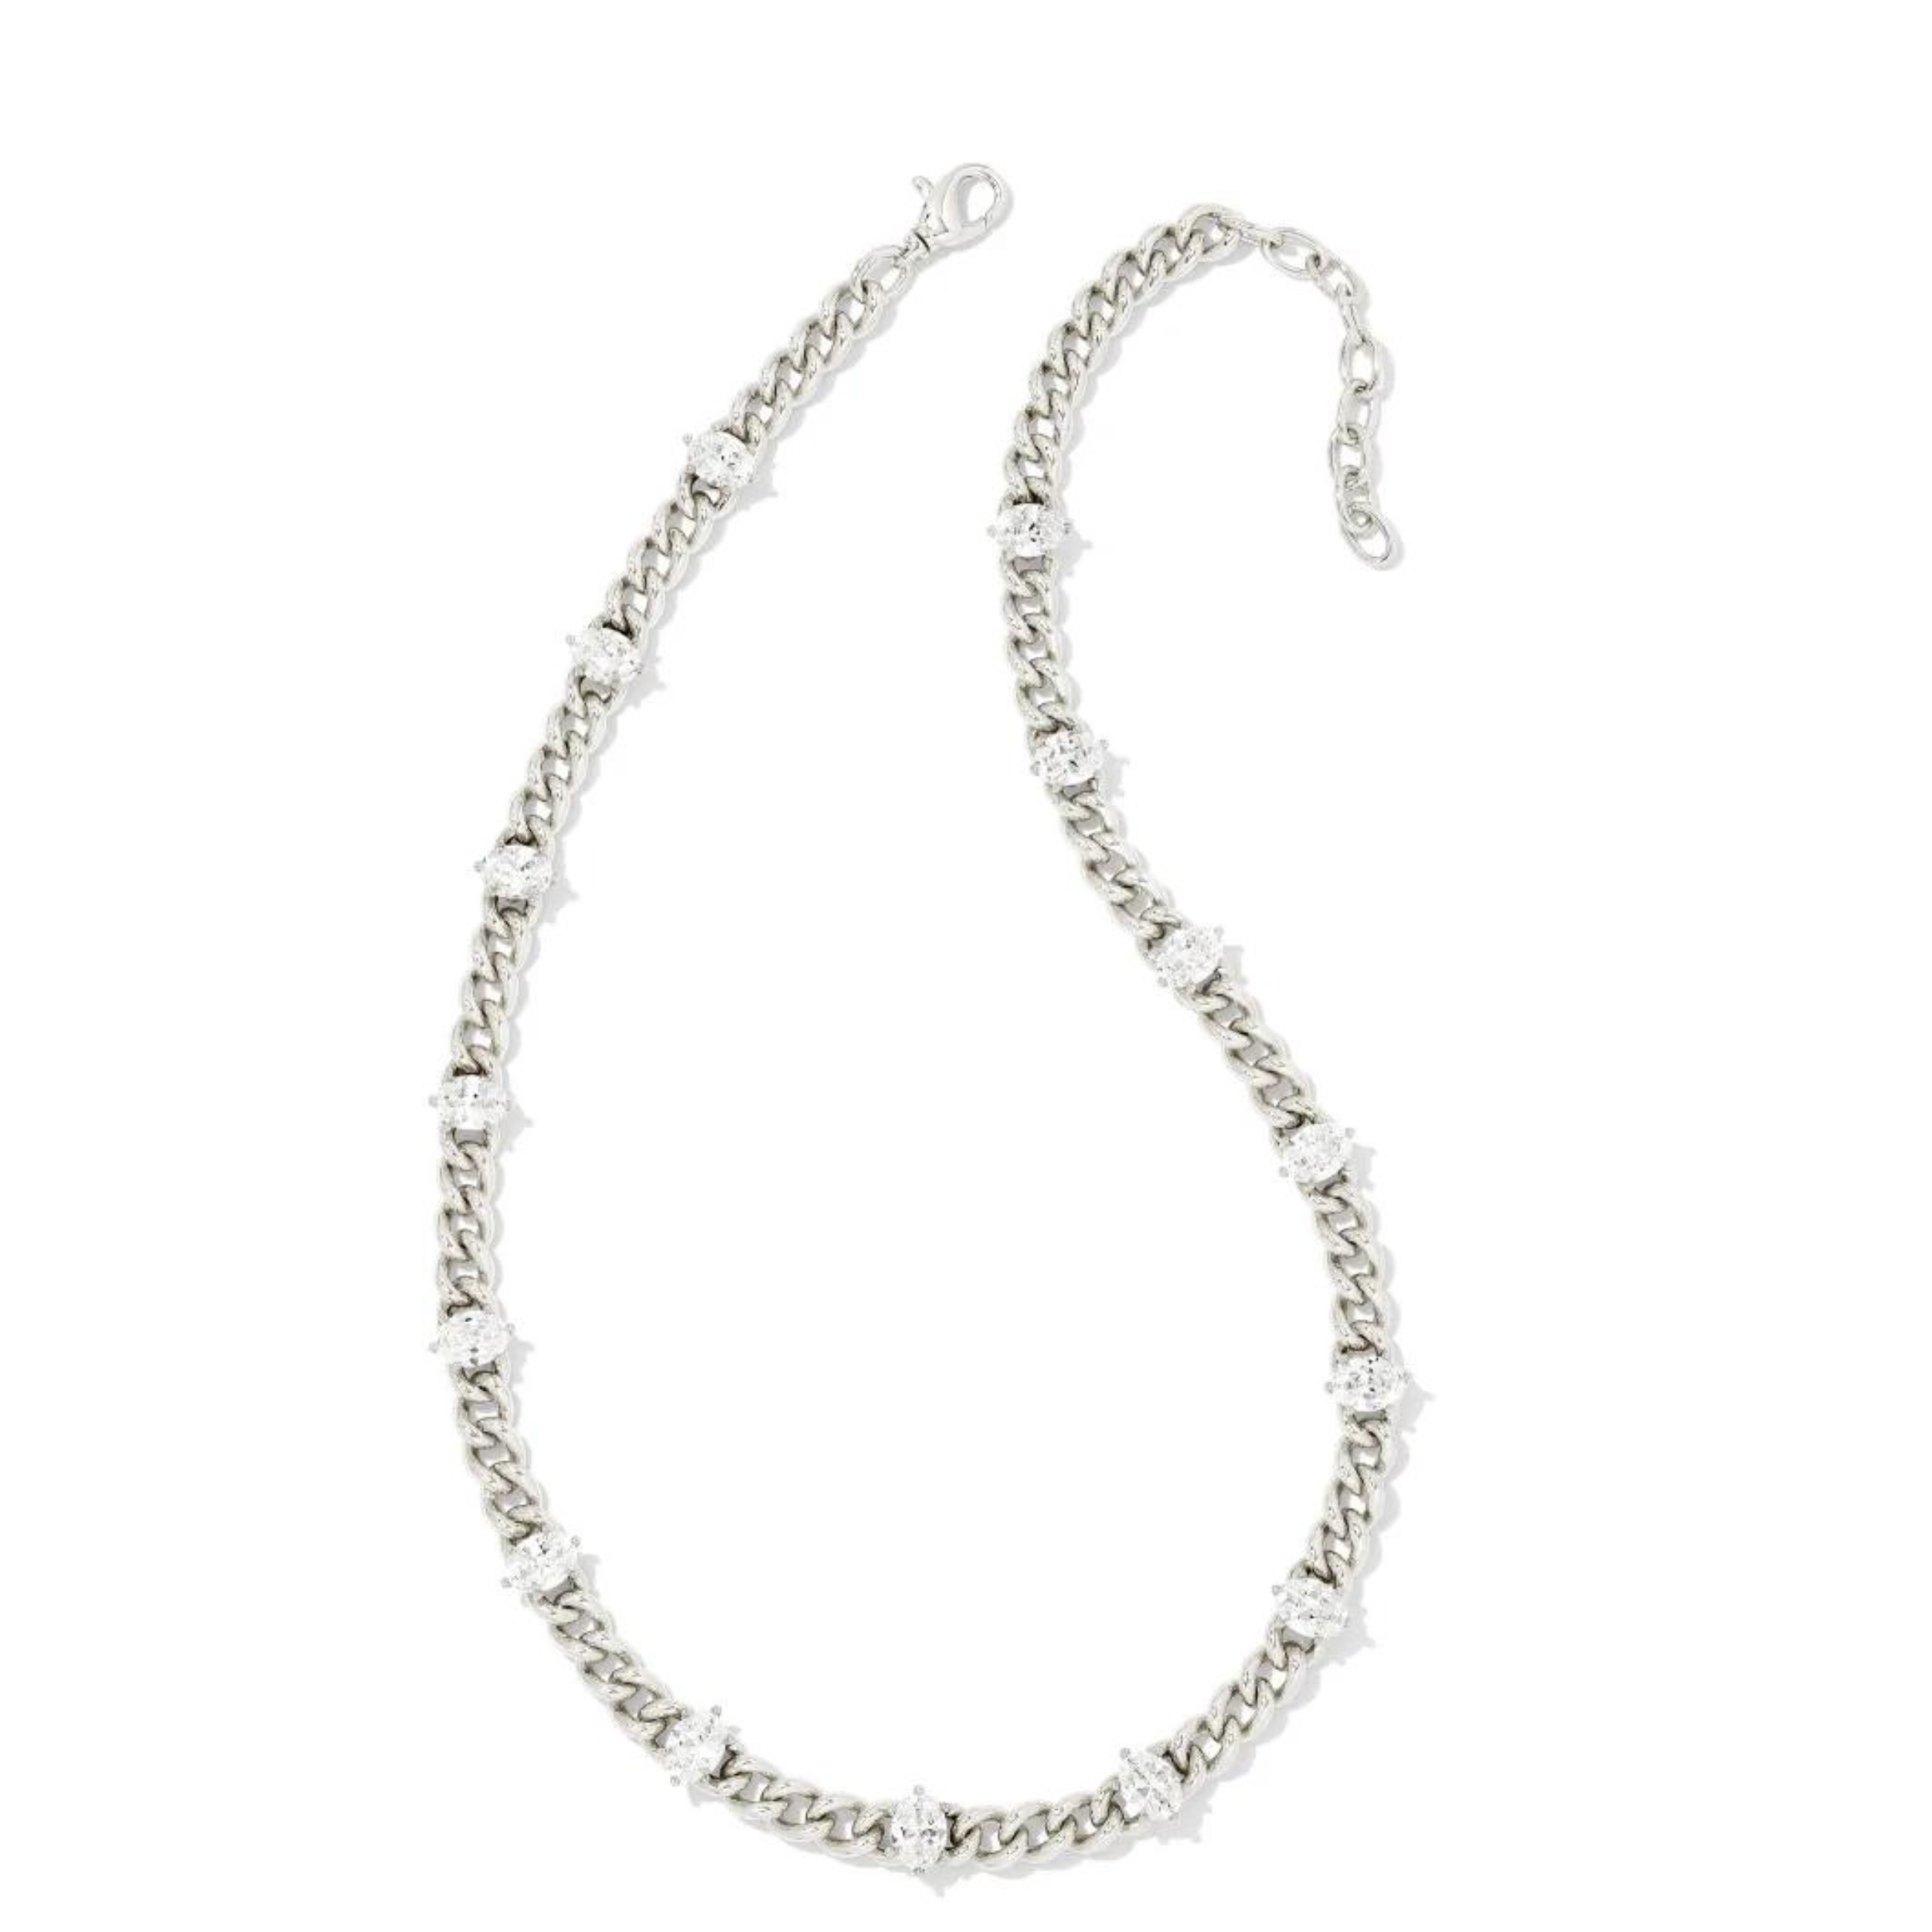 Silver chain necklace with white crystals, pictured on a white background.